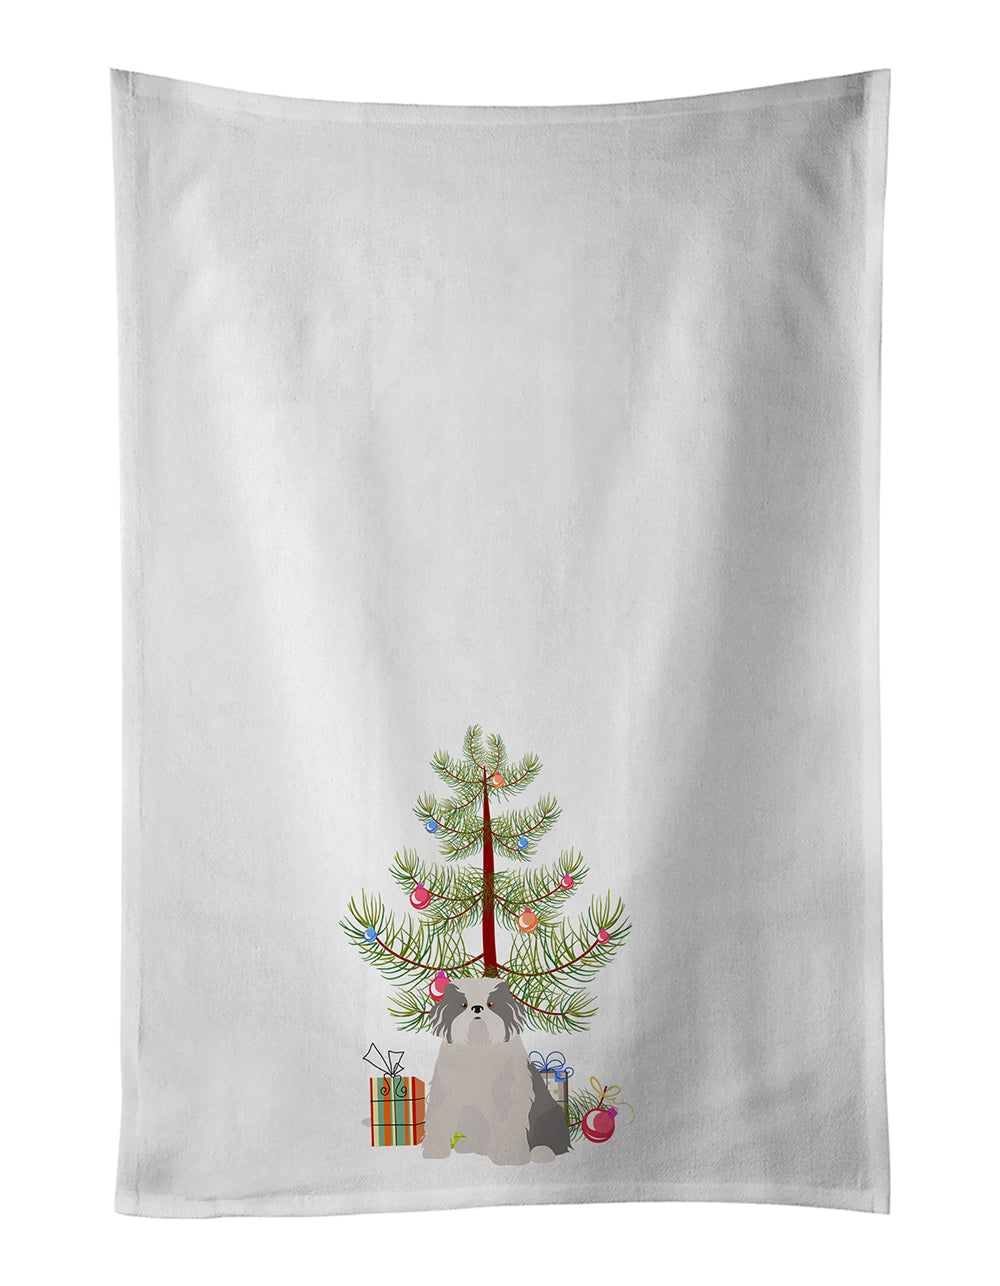 Buy this Odis Odessa Domestic Ideal Dog Christmas Tree White Kitchen Towel Set of 2